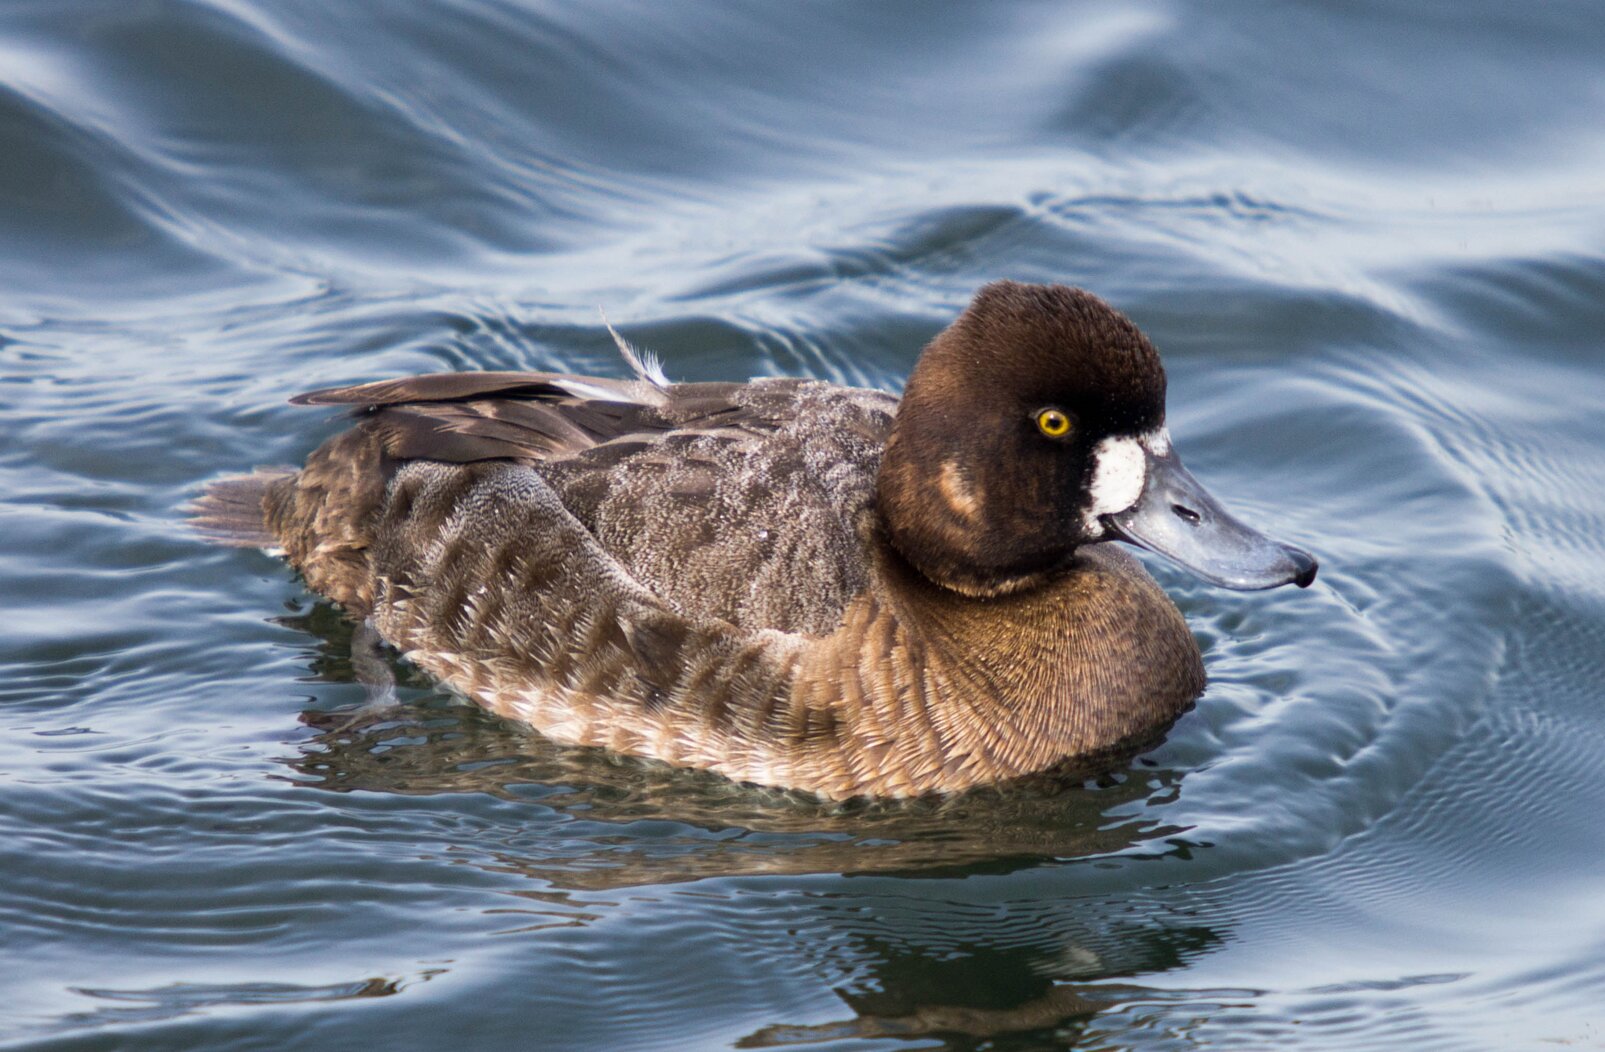 A female Lesser Scaup, showing the tufted peak towards the back of the head typical of this species, photographed in Sheepshead Bay. Photo: Will Pollard/CC BY-ND 2.0